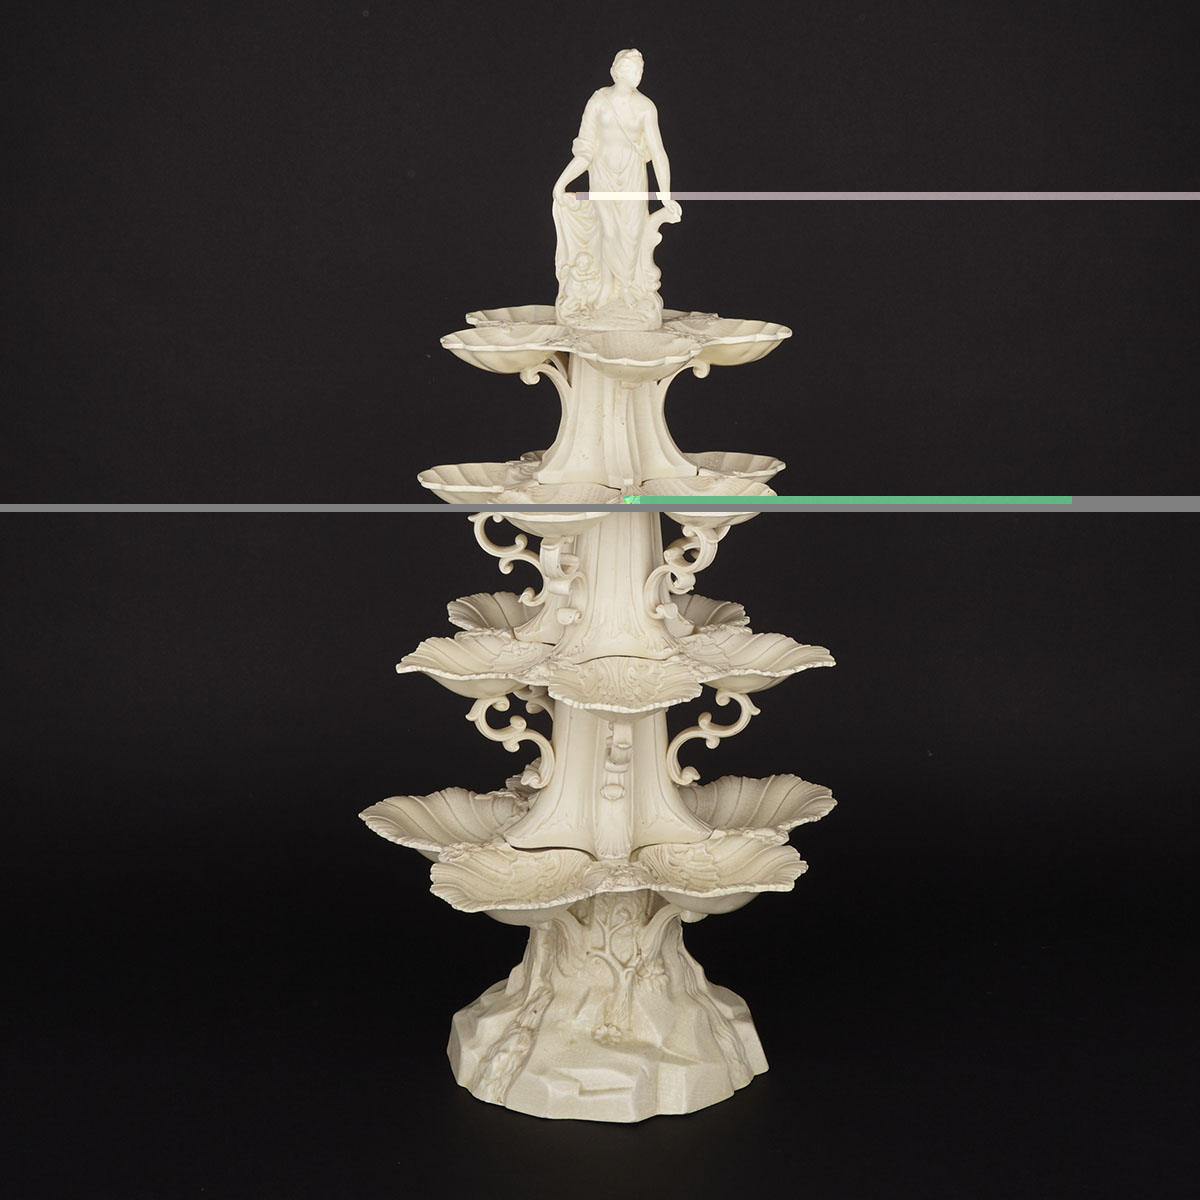 English Creamware Four-Tier Centrepiece, probably Leeds, late 18th century